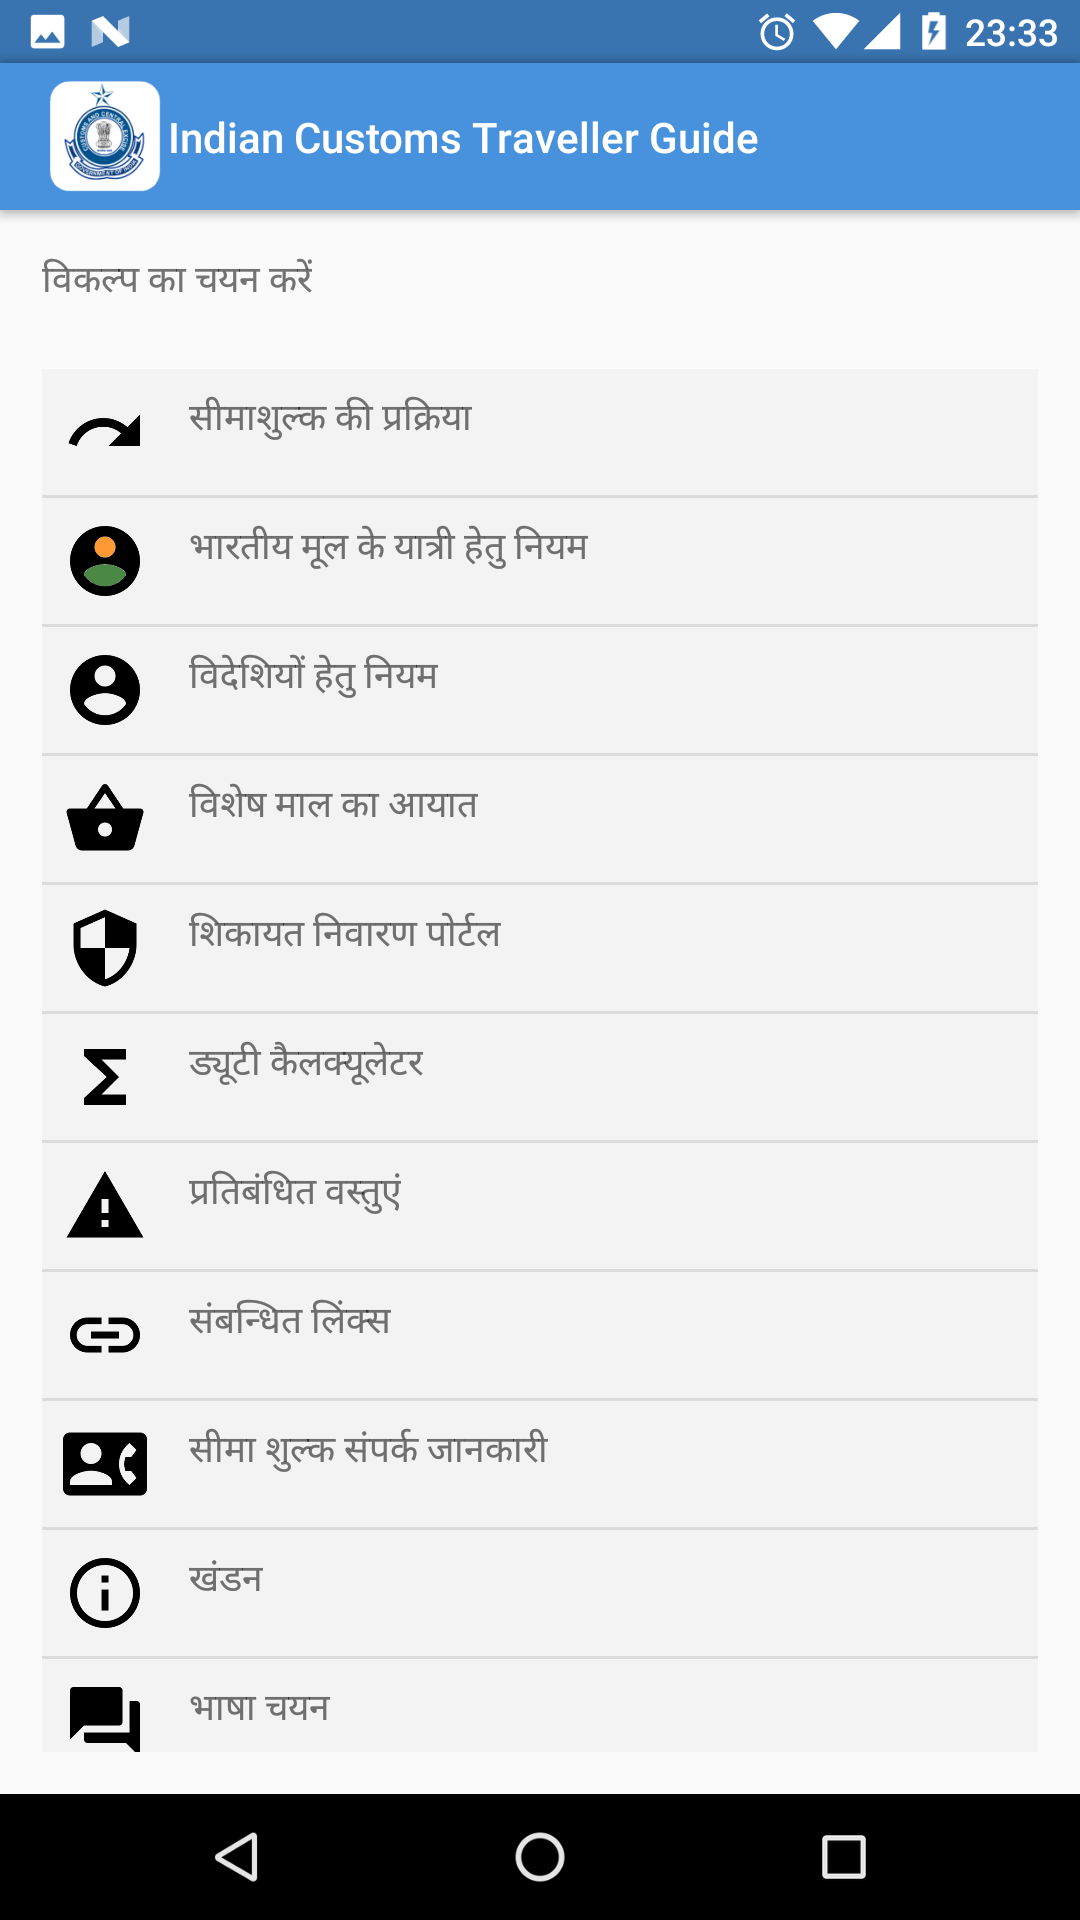 Android application Indian Customs Traveller Guide screenshort